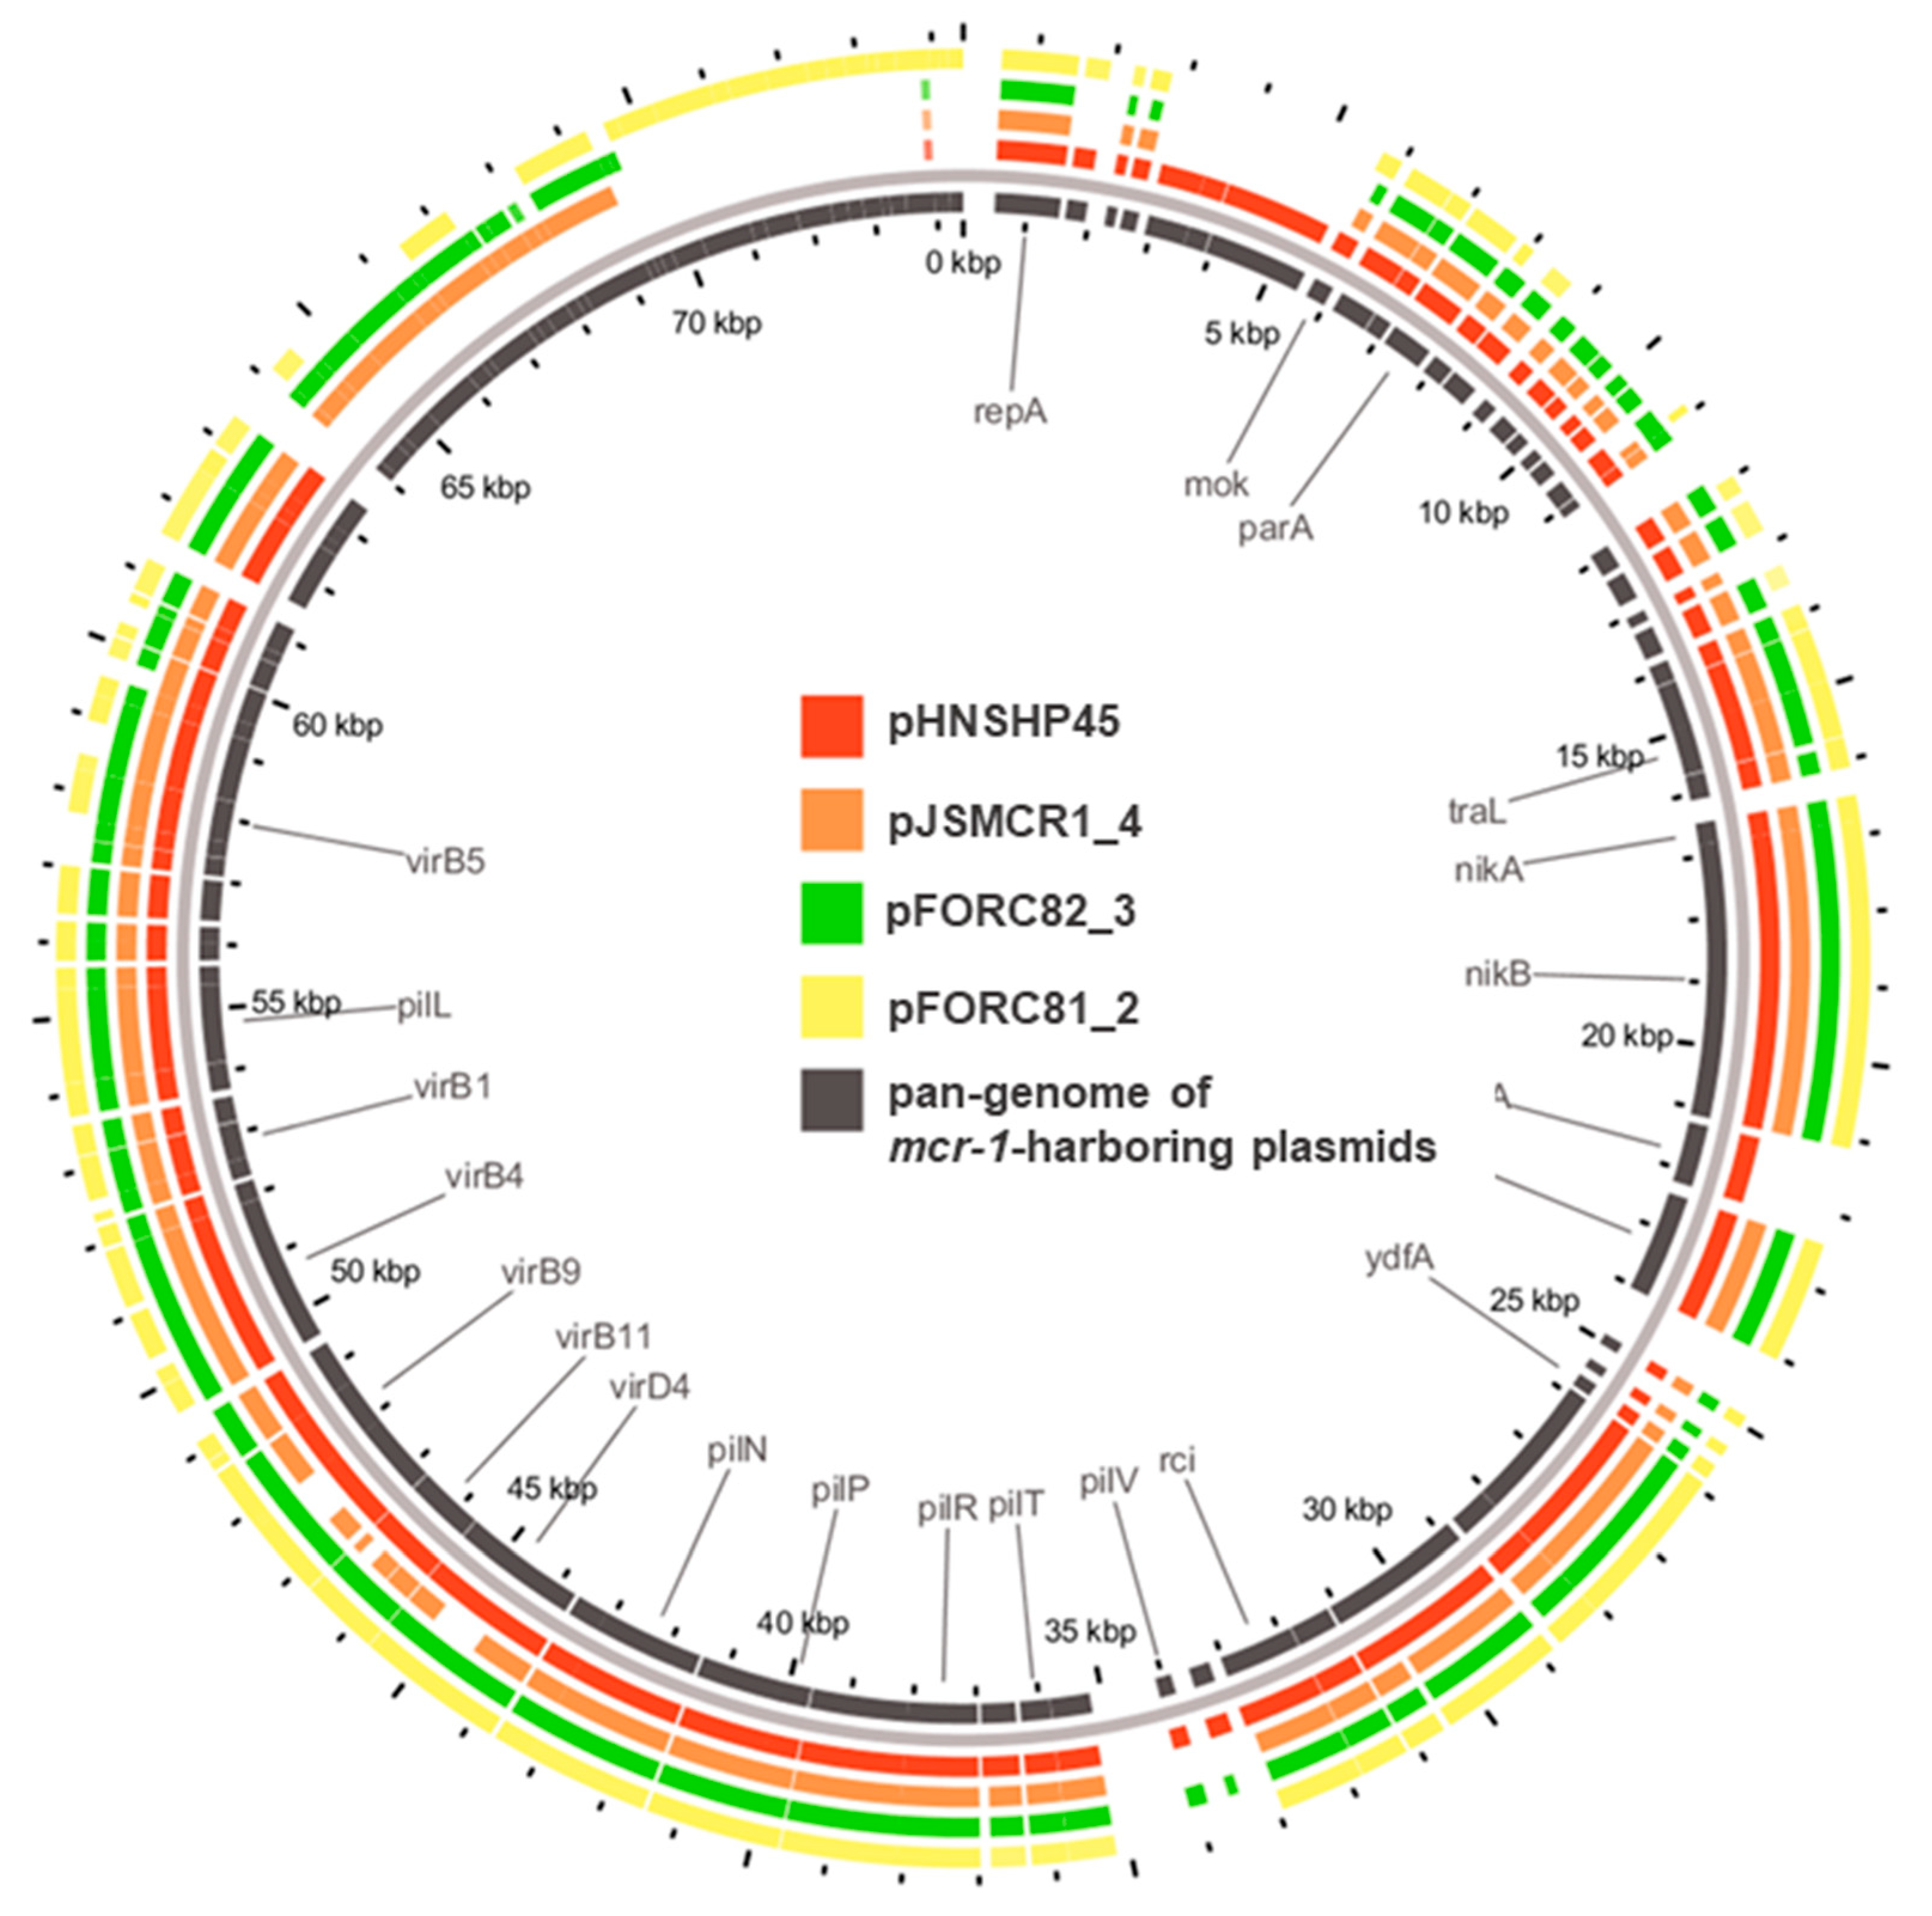 Frontiers  Genomic Characterization of mcr-1.1-Producing Escherichia coli  Recovered From Human Infections in São Paulo, Brazil